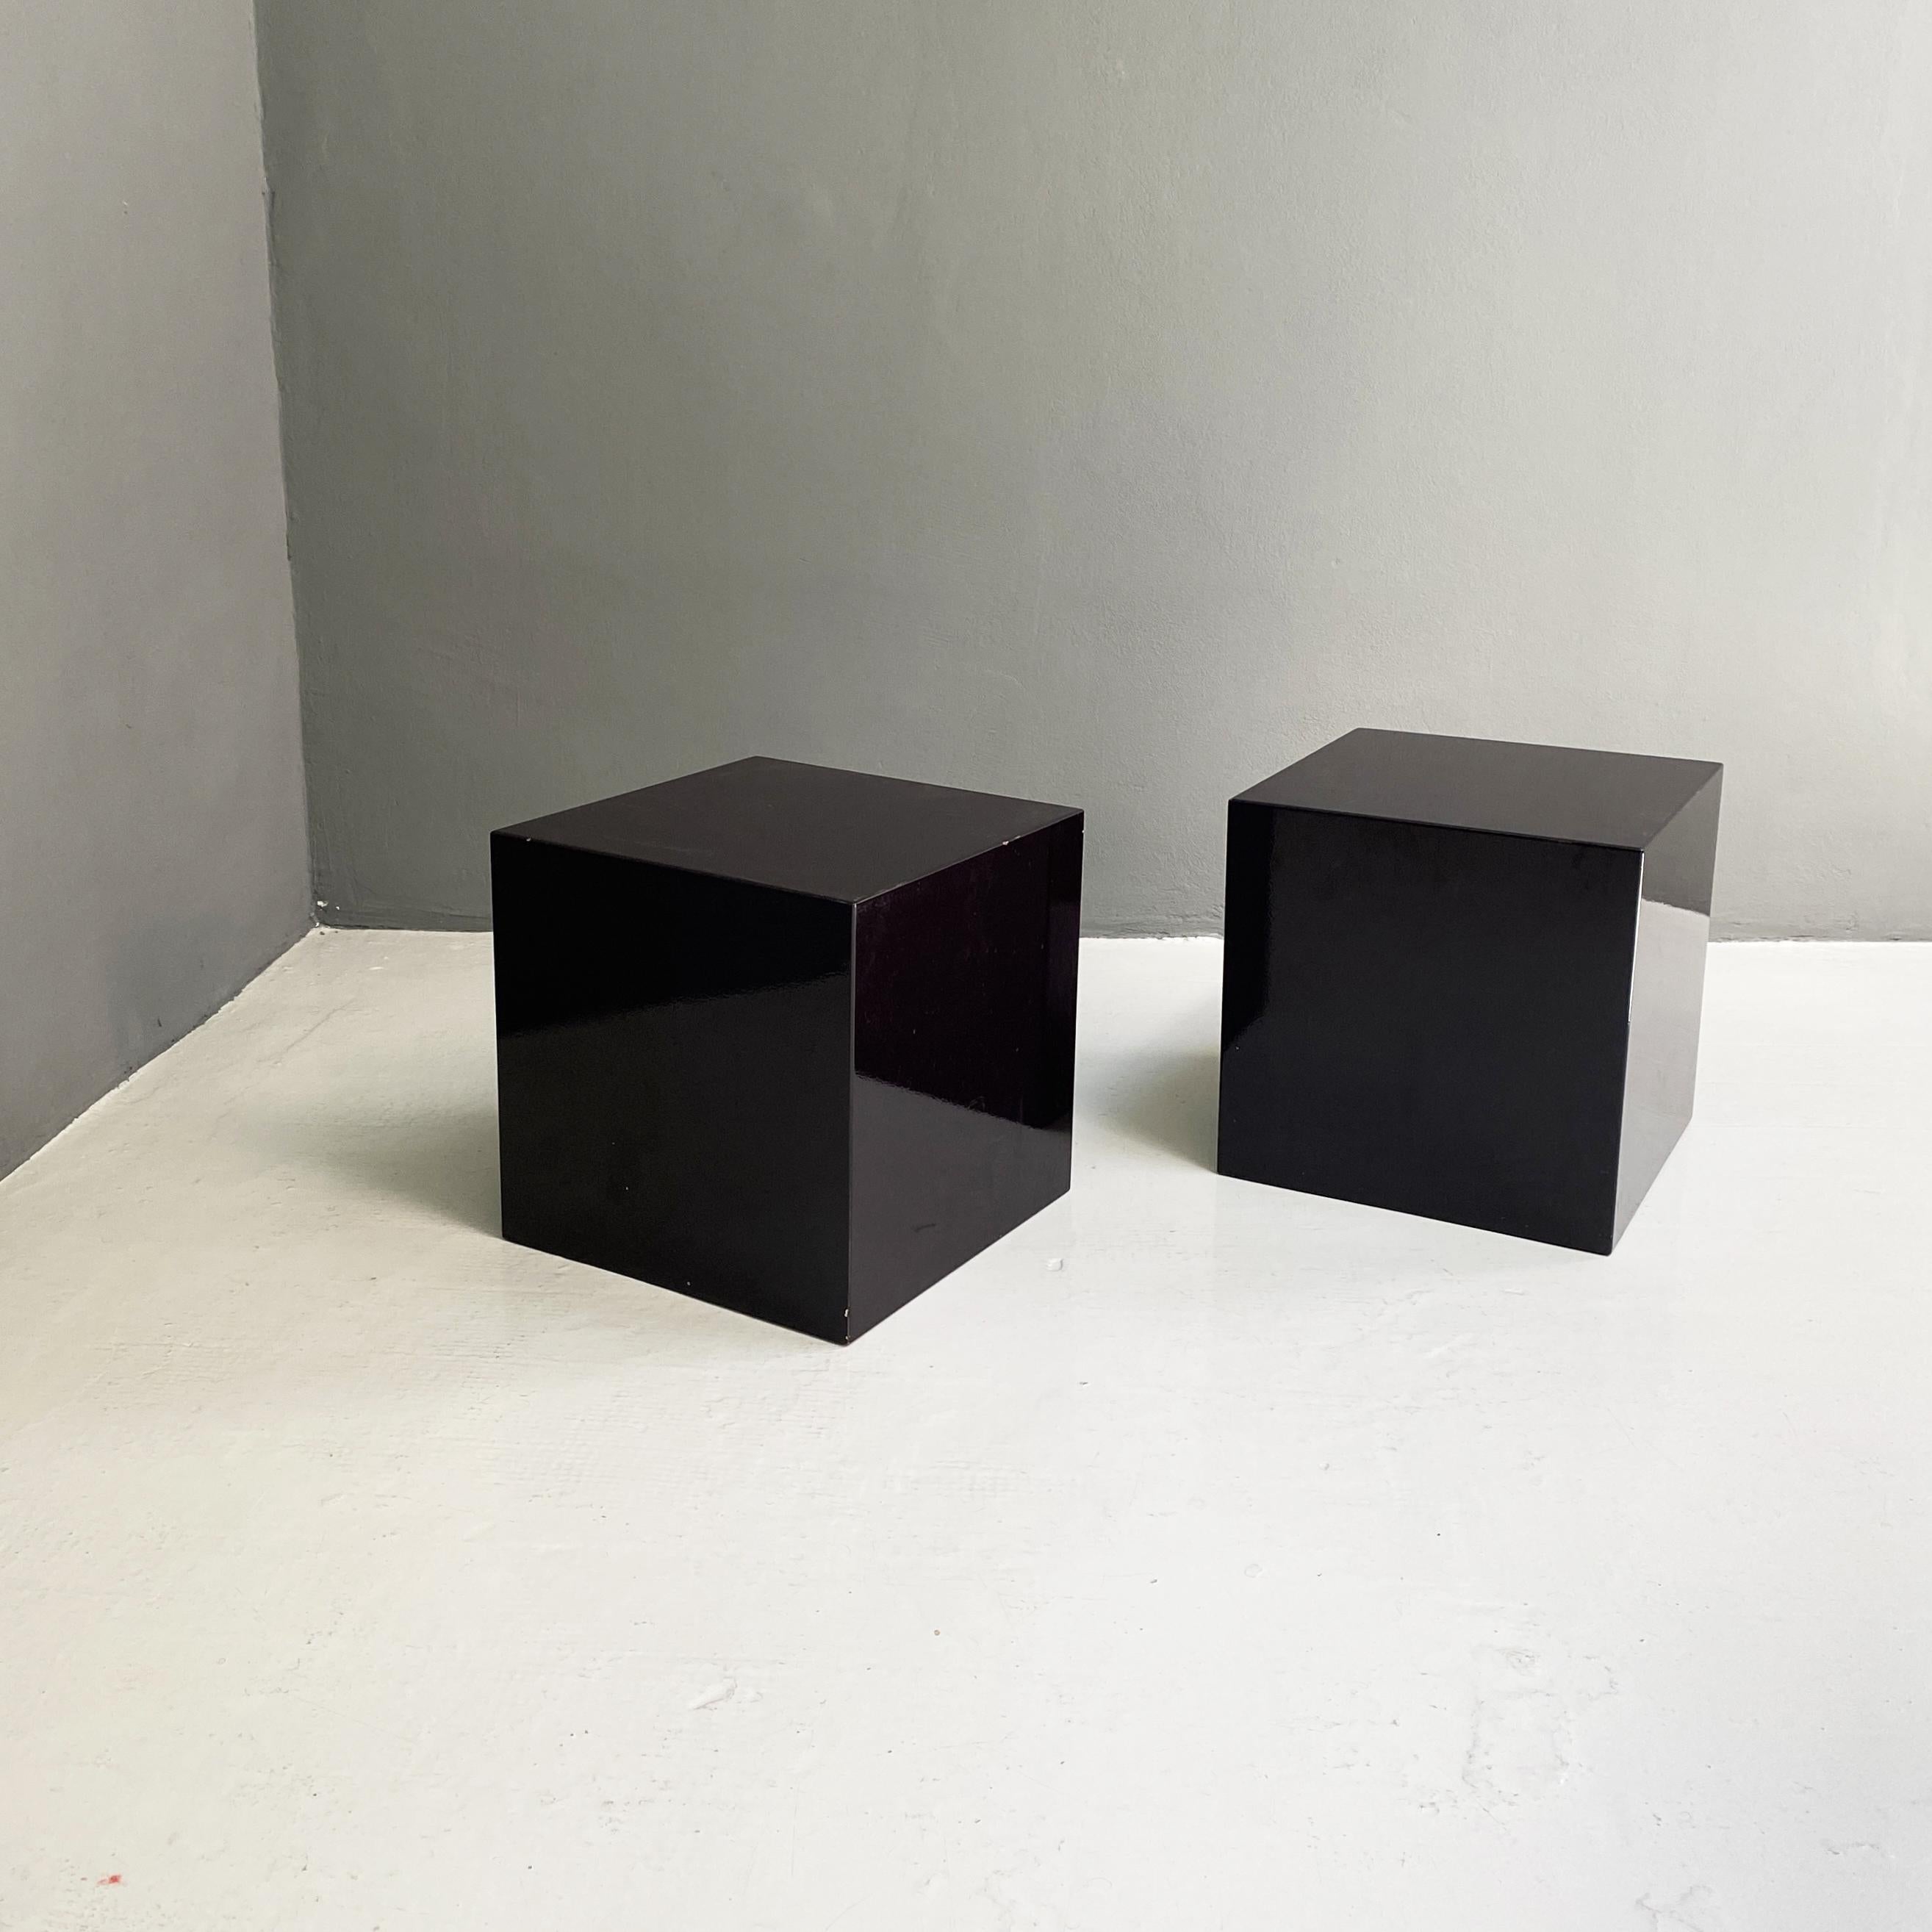 Italian Cube-Shaped Coffee Tables or Bedside Tables in Dark Brown Lacquered Wood, 1990s  For Sale